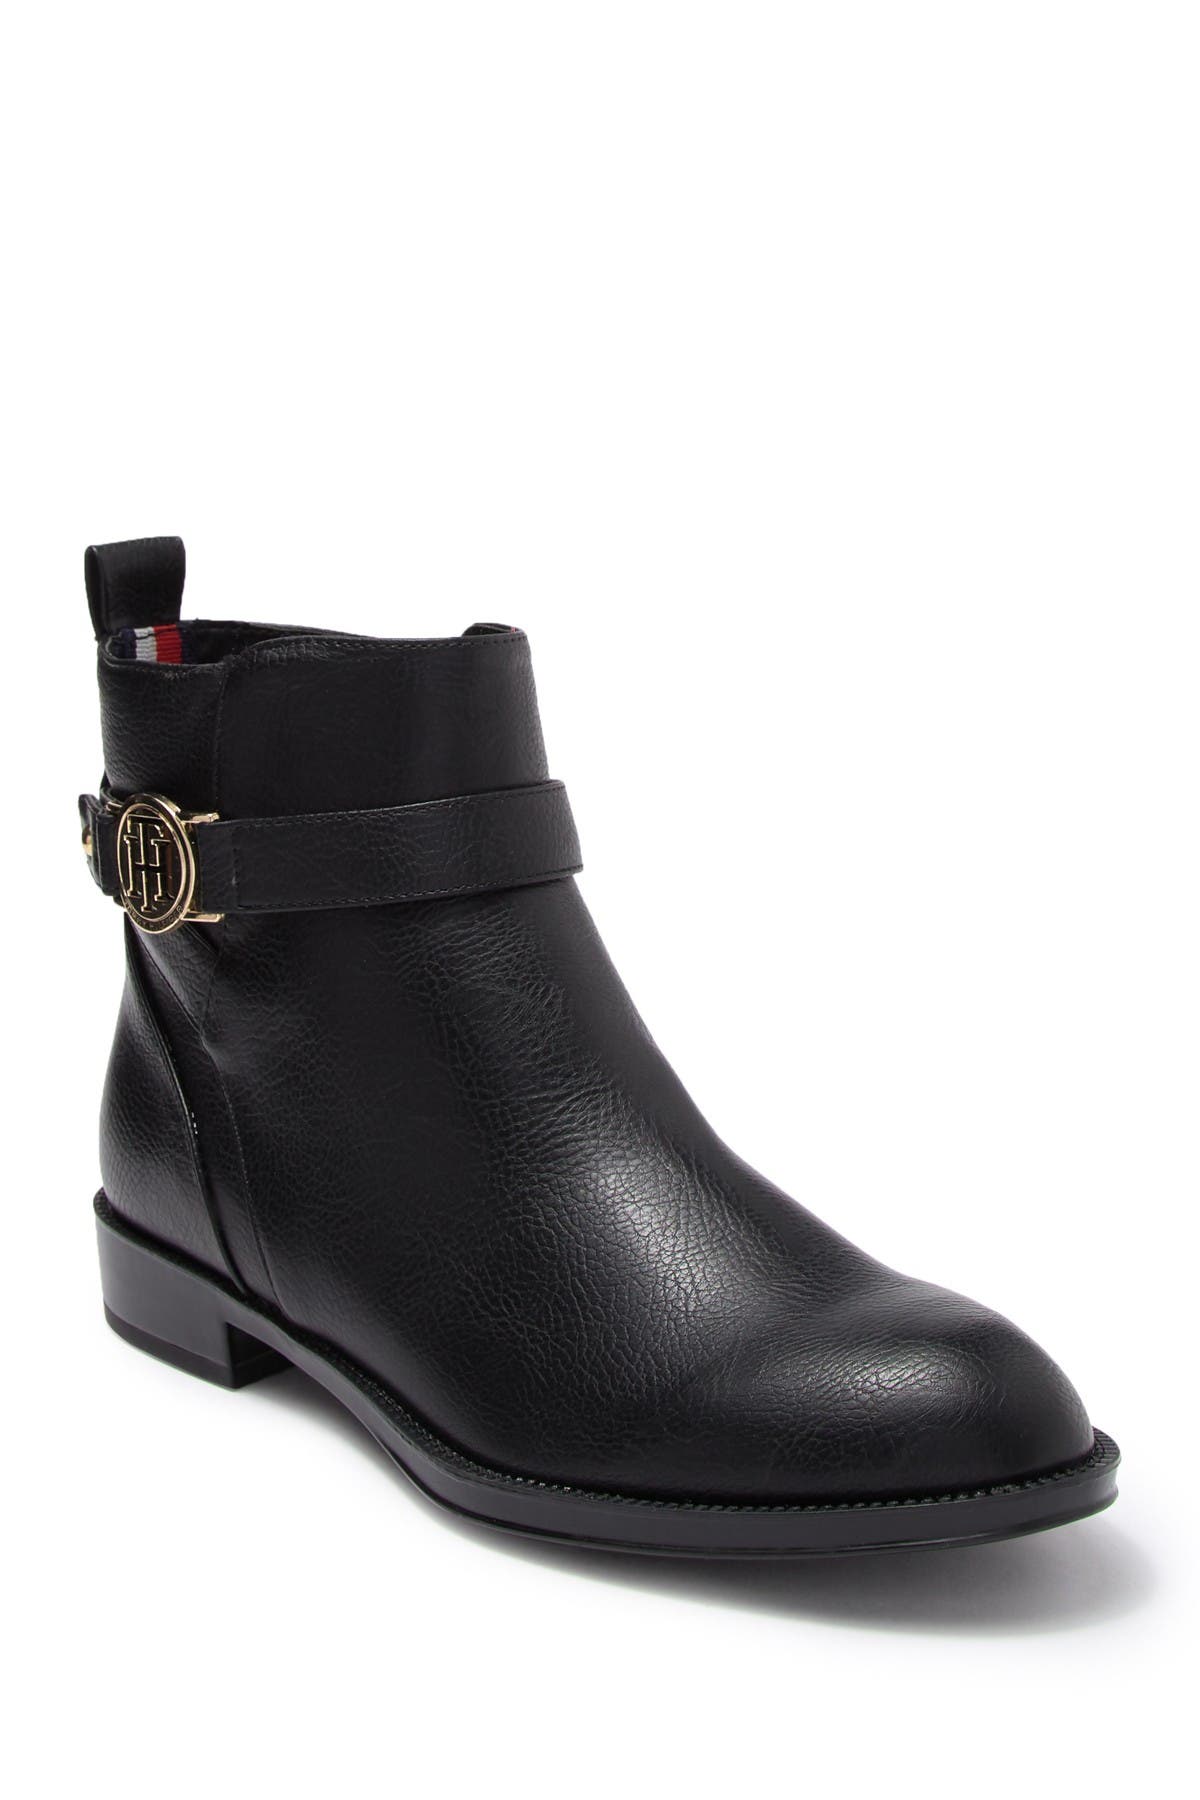 Tommy Hilfiger | Rumore Chelsea Boot 